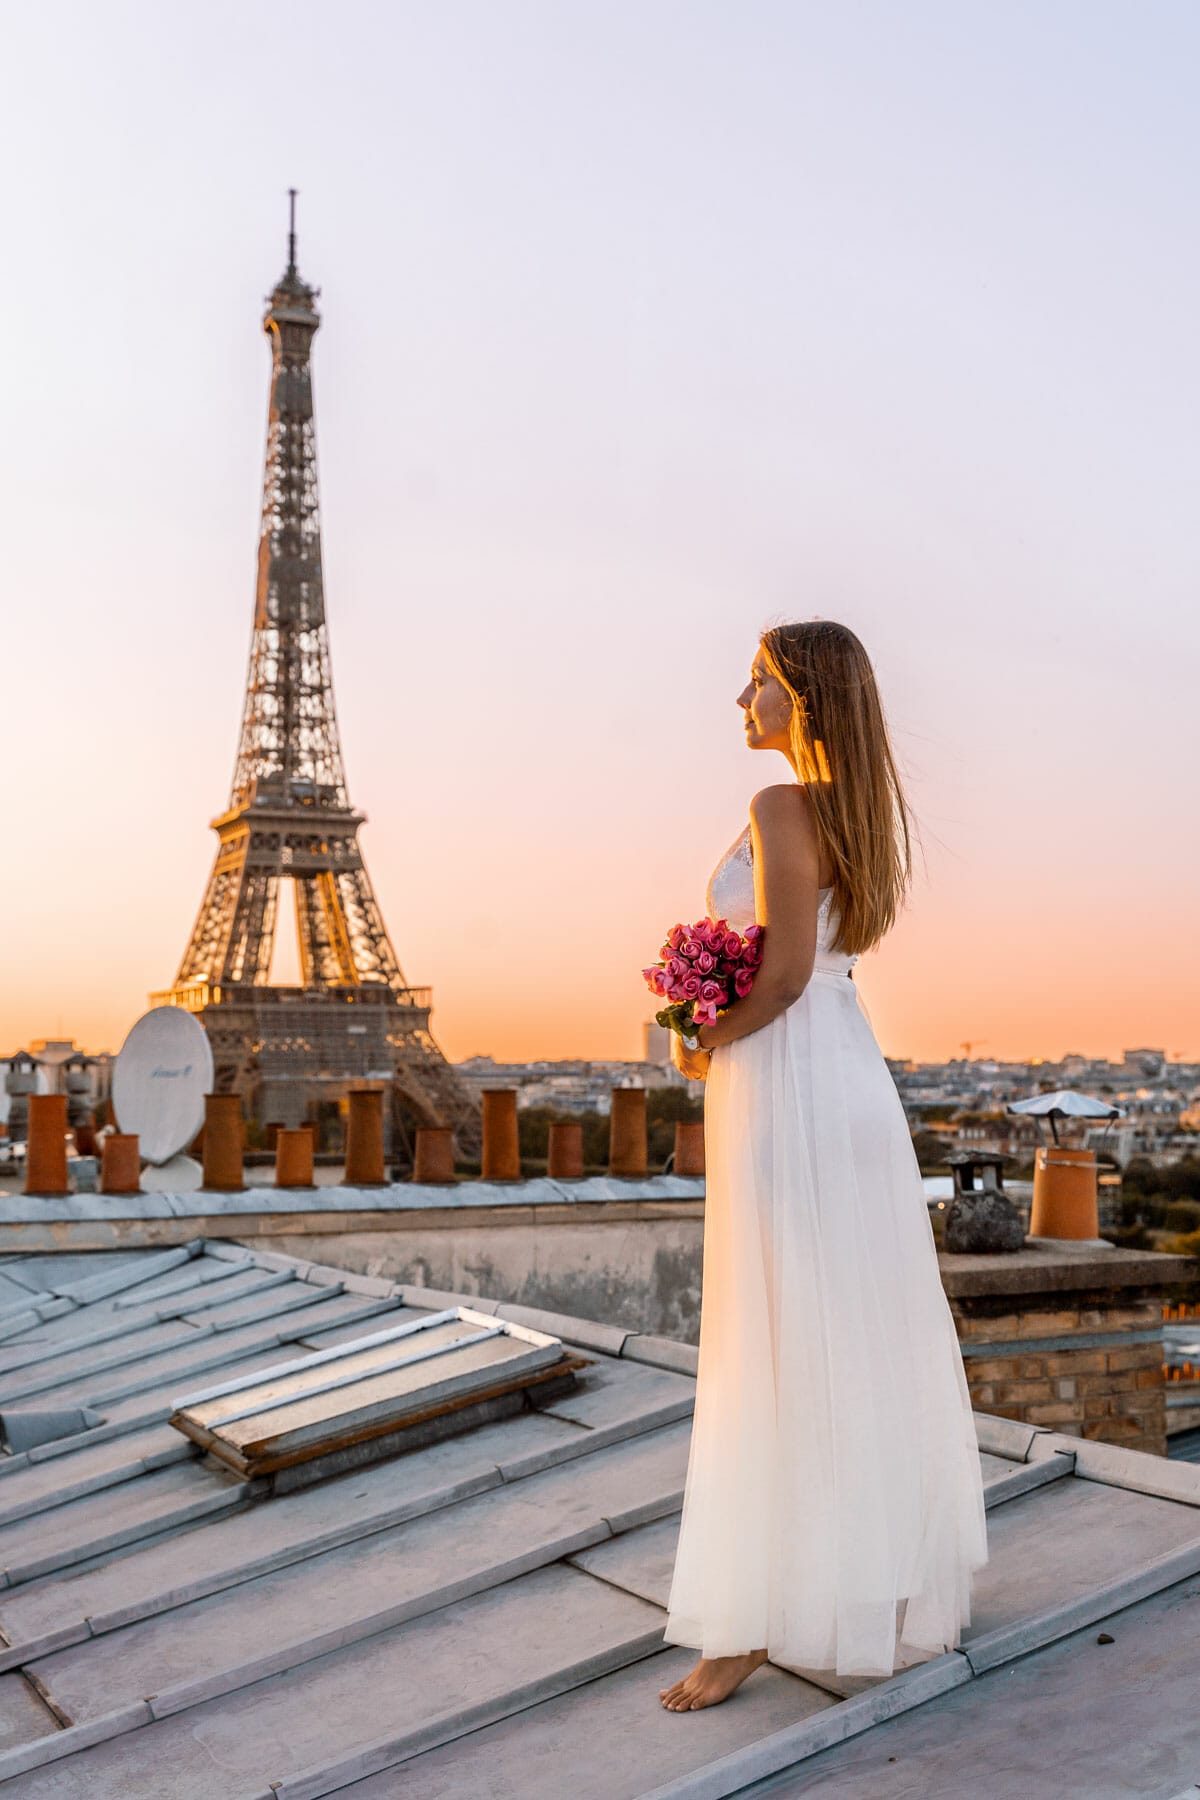 Girl in a white dress standing on a rooftop in Paris, looking at the Eiffel Tower